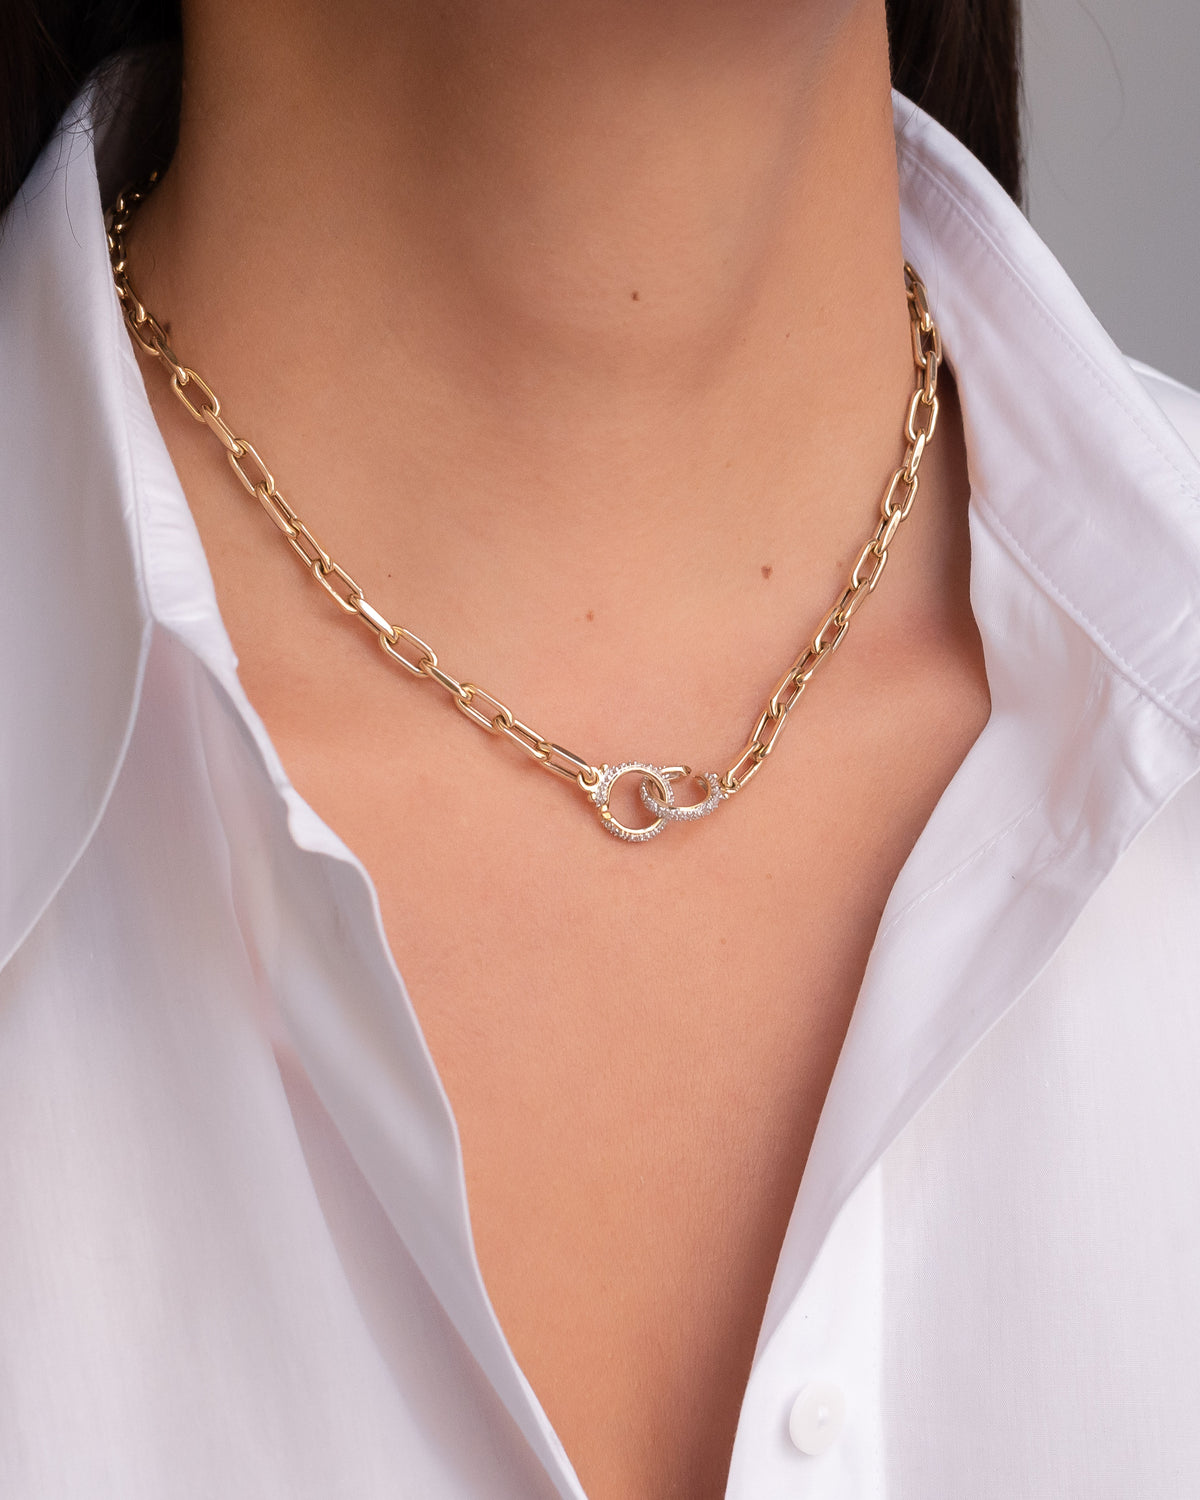 14k Gold Large Open Link Chain with Diamond Handcuffs Necklace